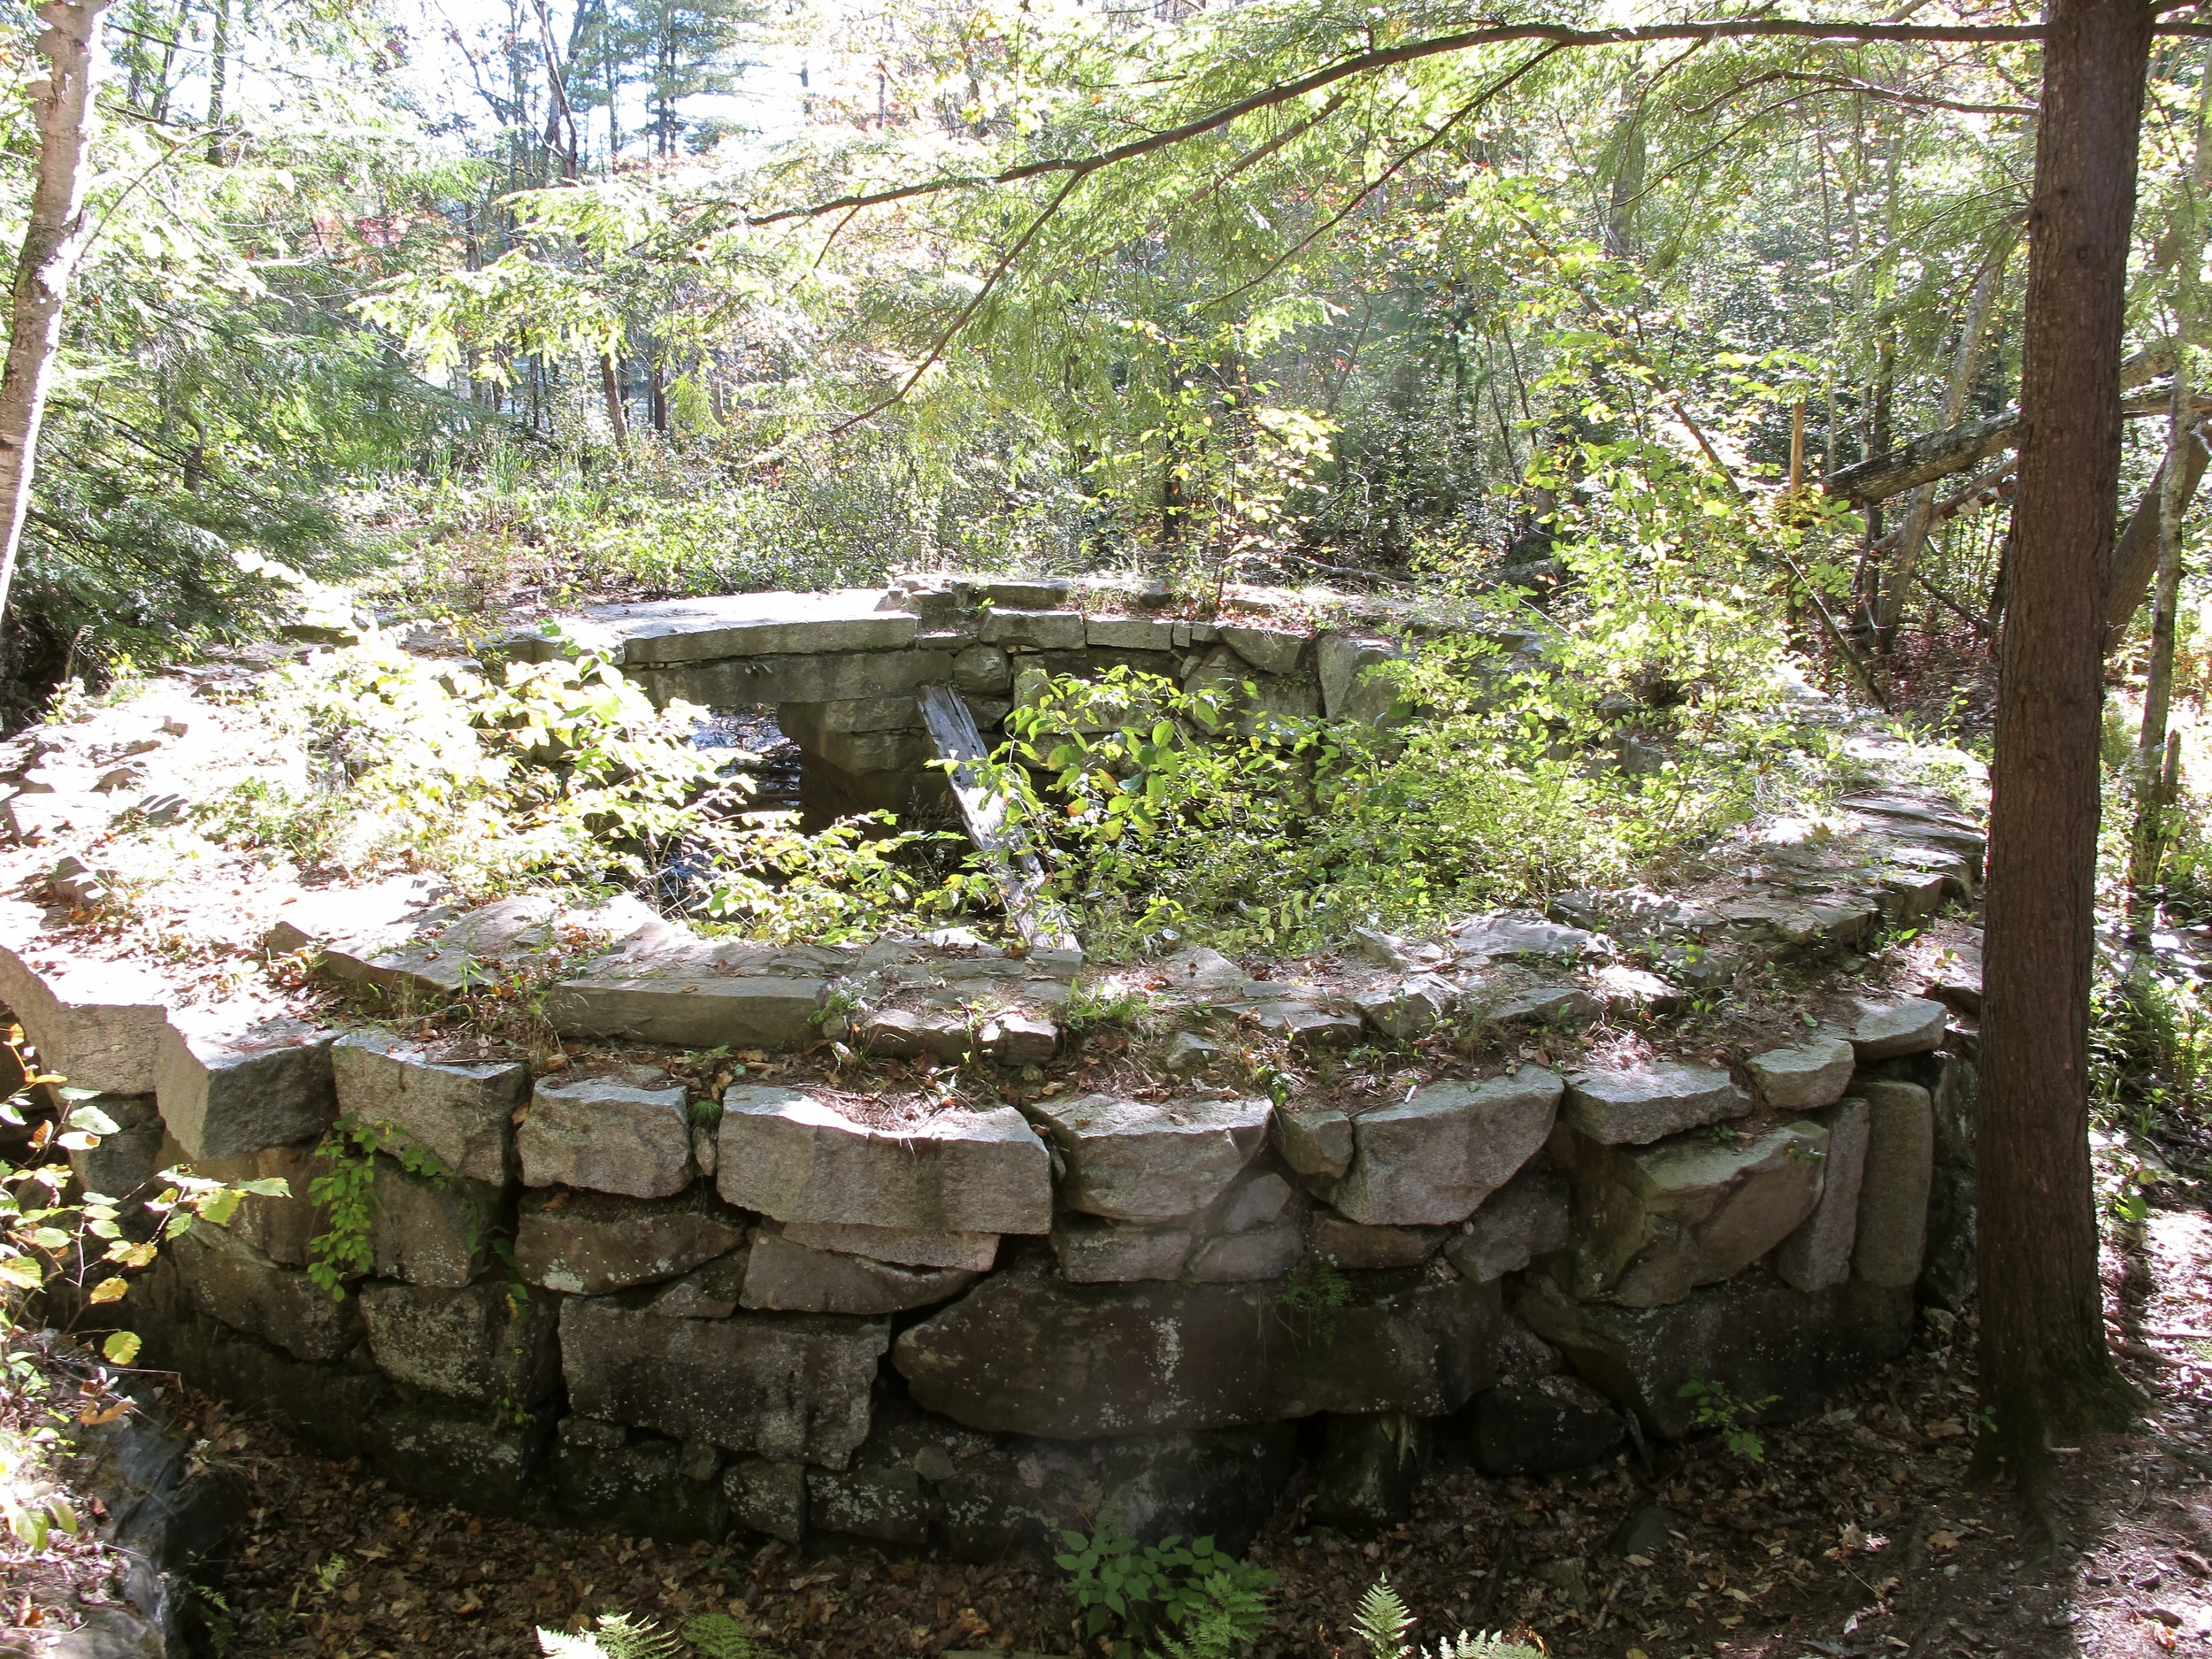  This is the remaining foundation of a round mill that was used to make gunpowder in Gorham.&nbsp; 